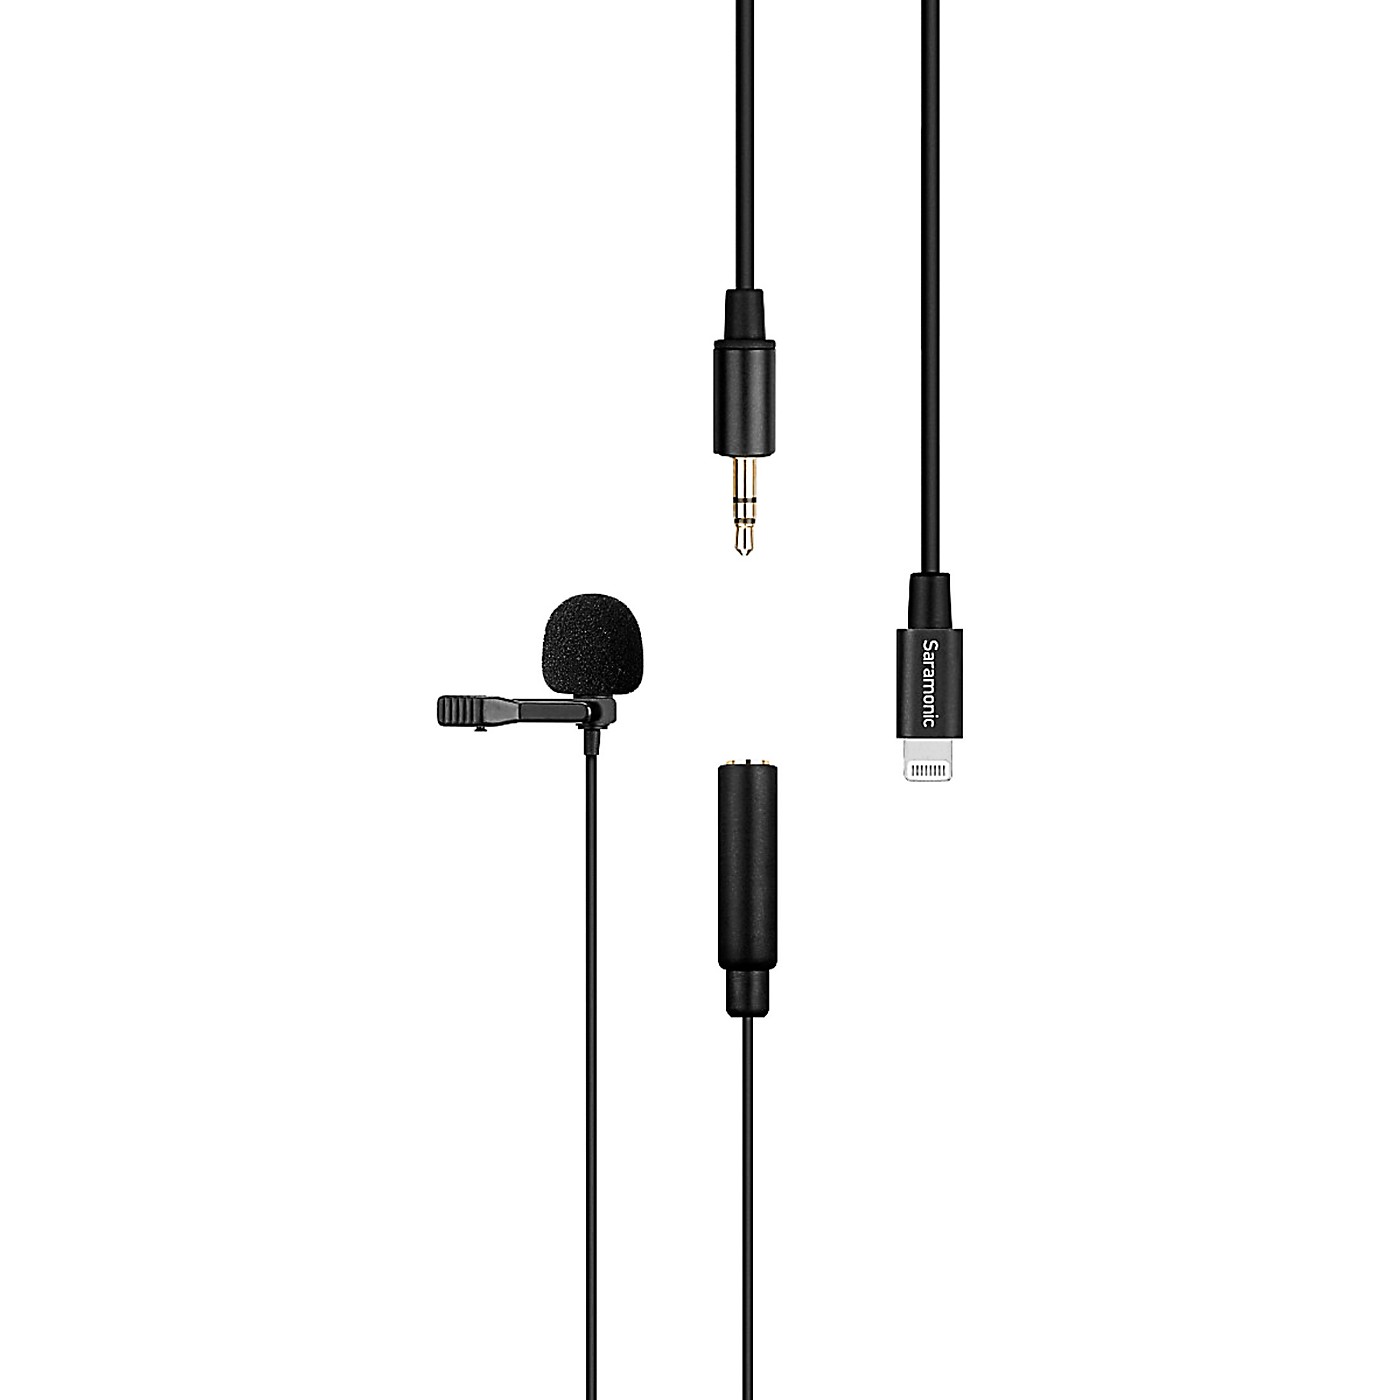 Saramonic LavMicro U1A Omnidirectional Clip-On Lavalier Microphone with Lightning Connector for iOS Devices thumbnail